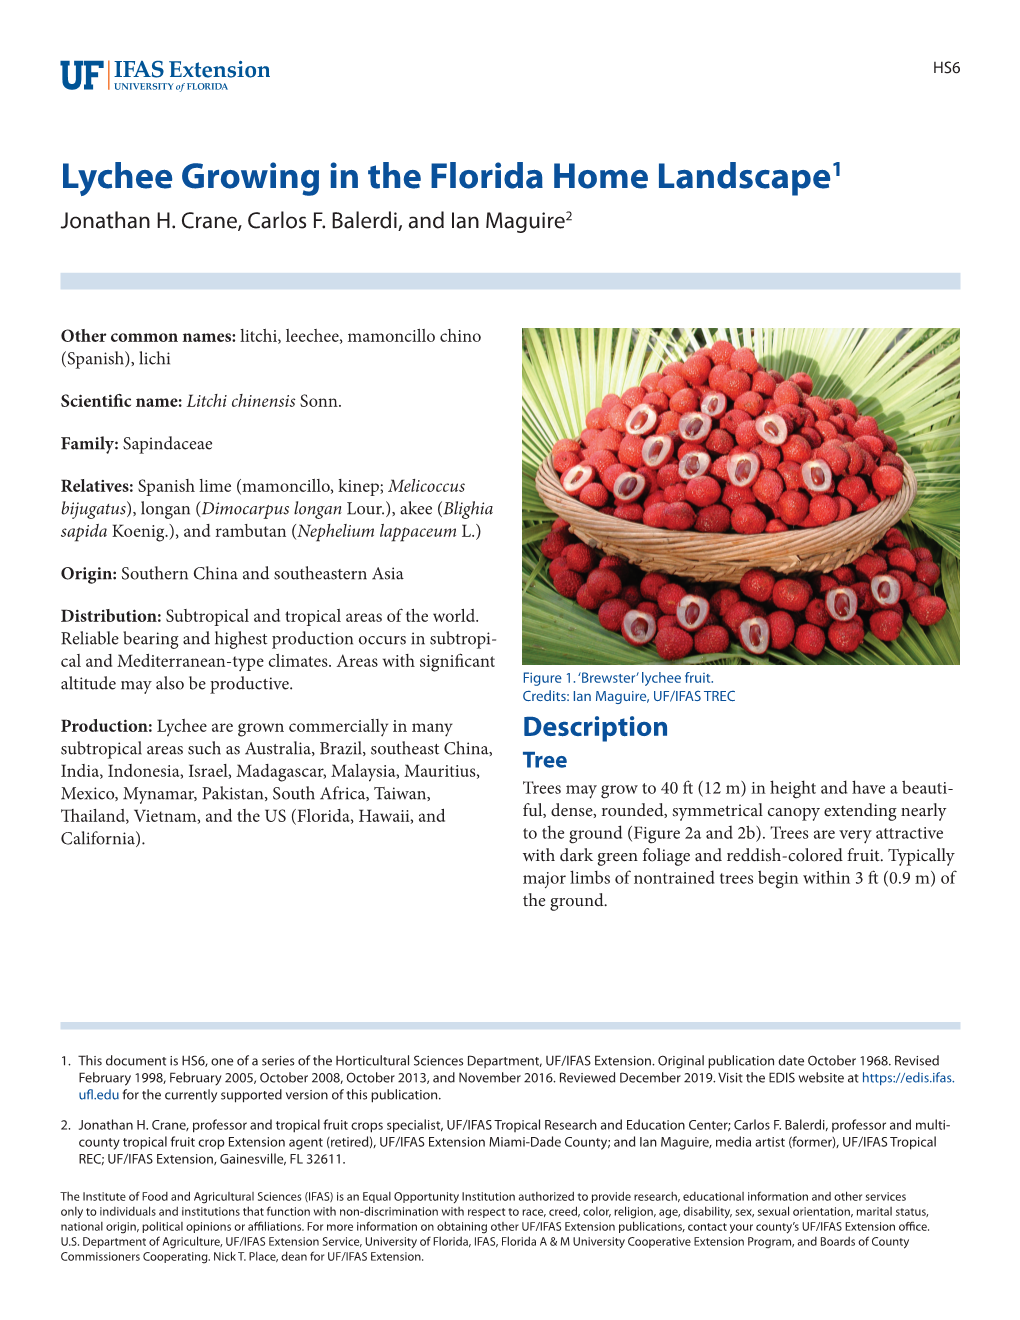 Lychee Growing in the Florida Home Landscape1 Jonathan H